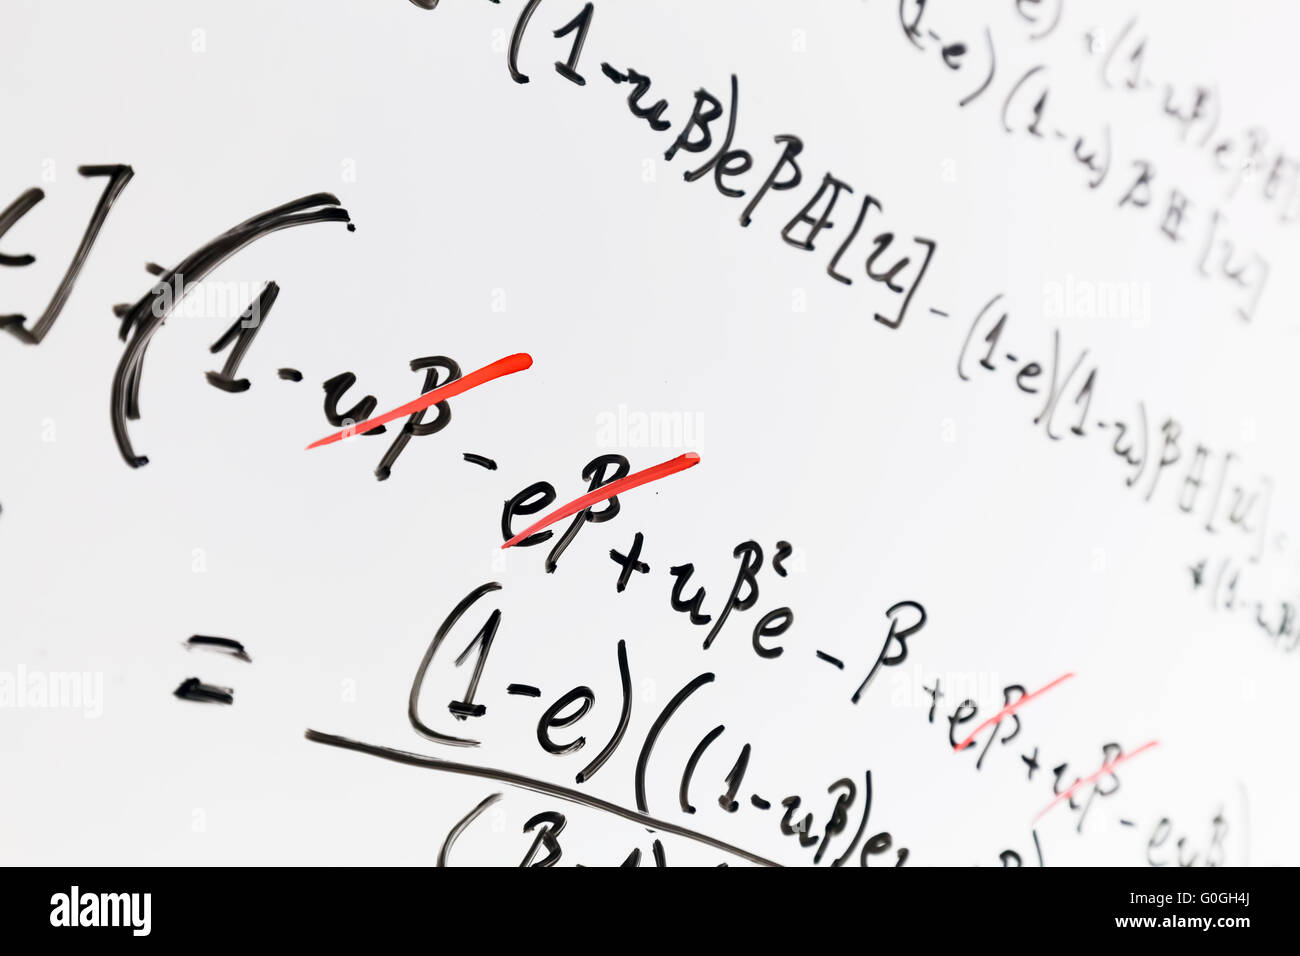 Complex math formulas on whiteboard. Mathematics and science with economics Stock Photo